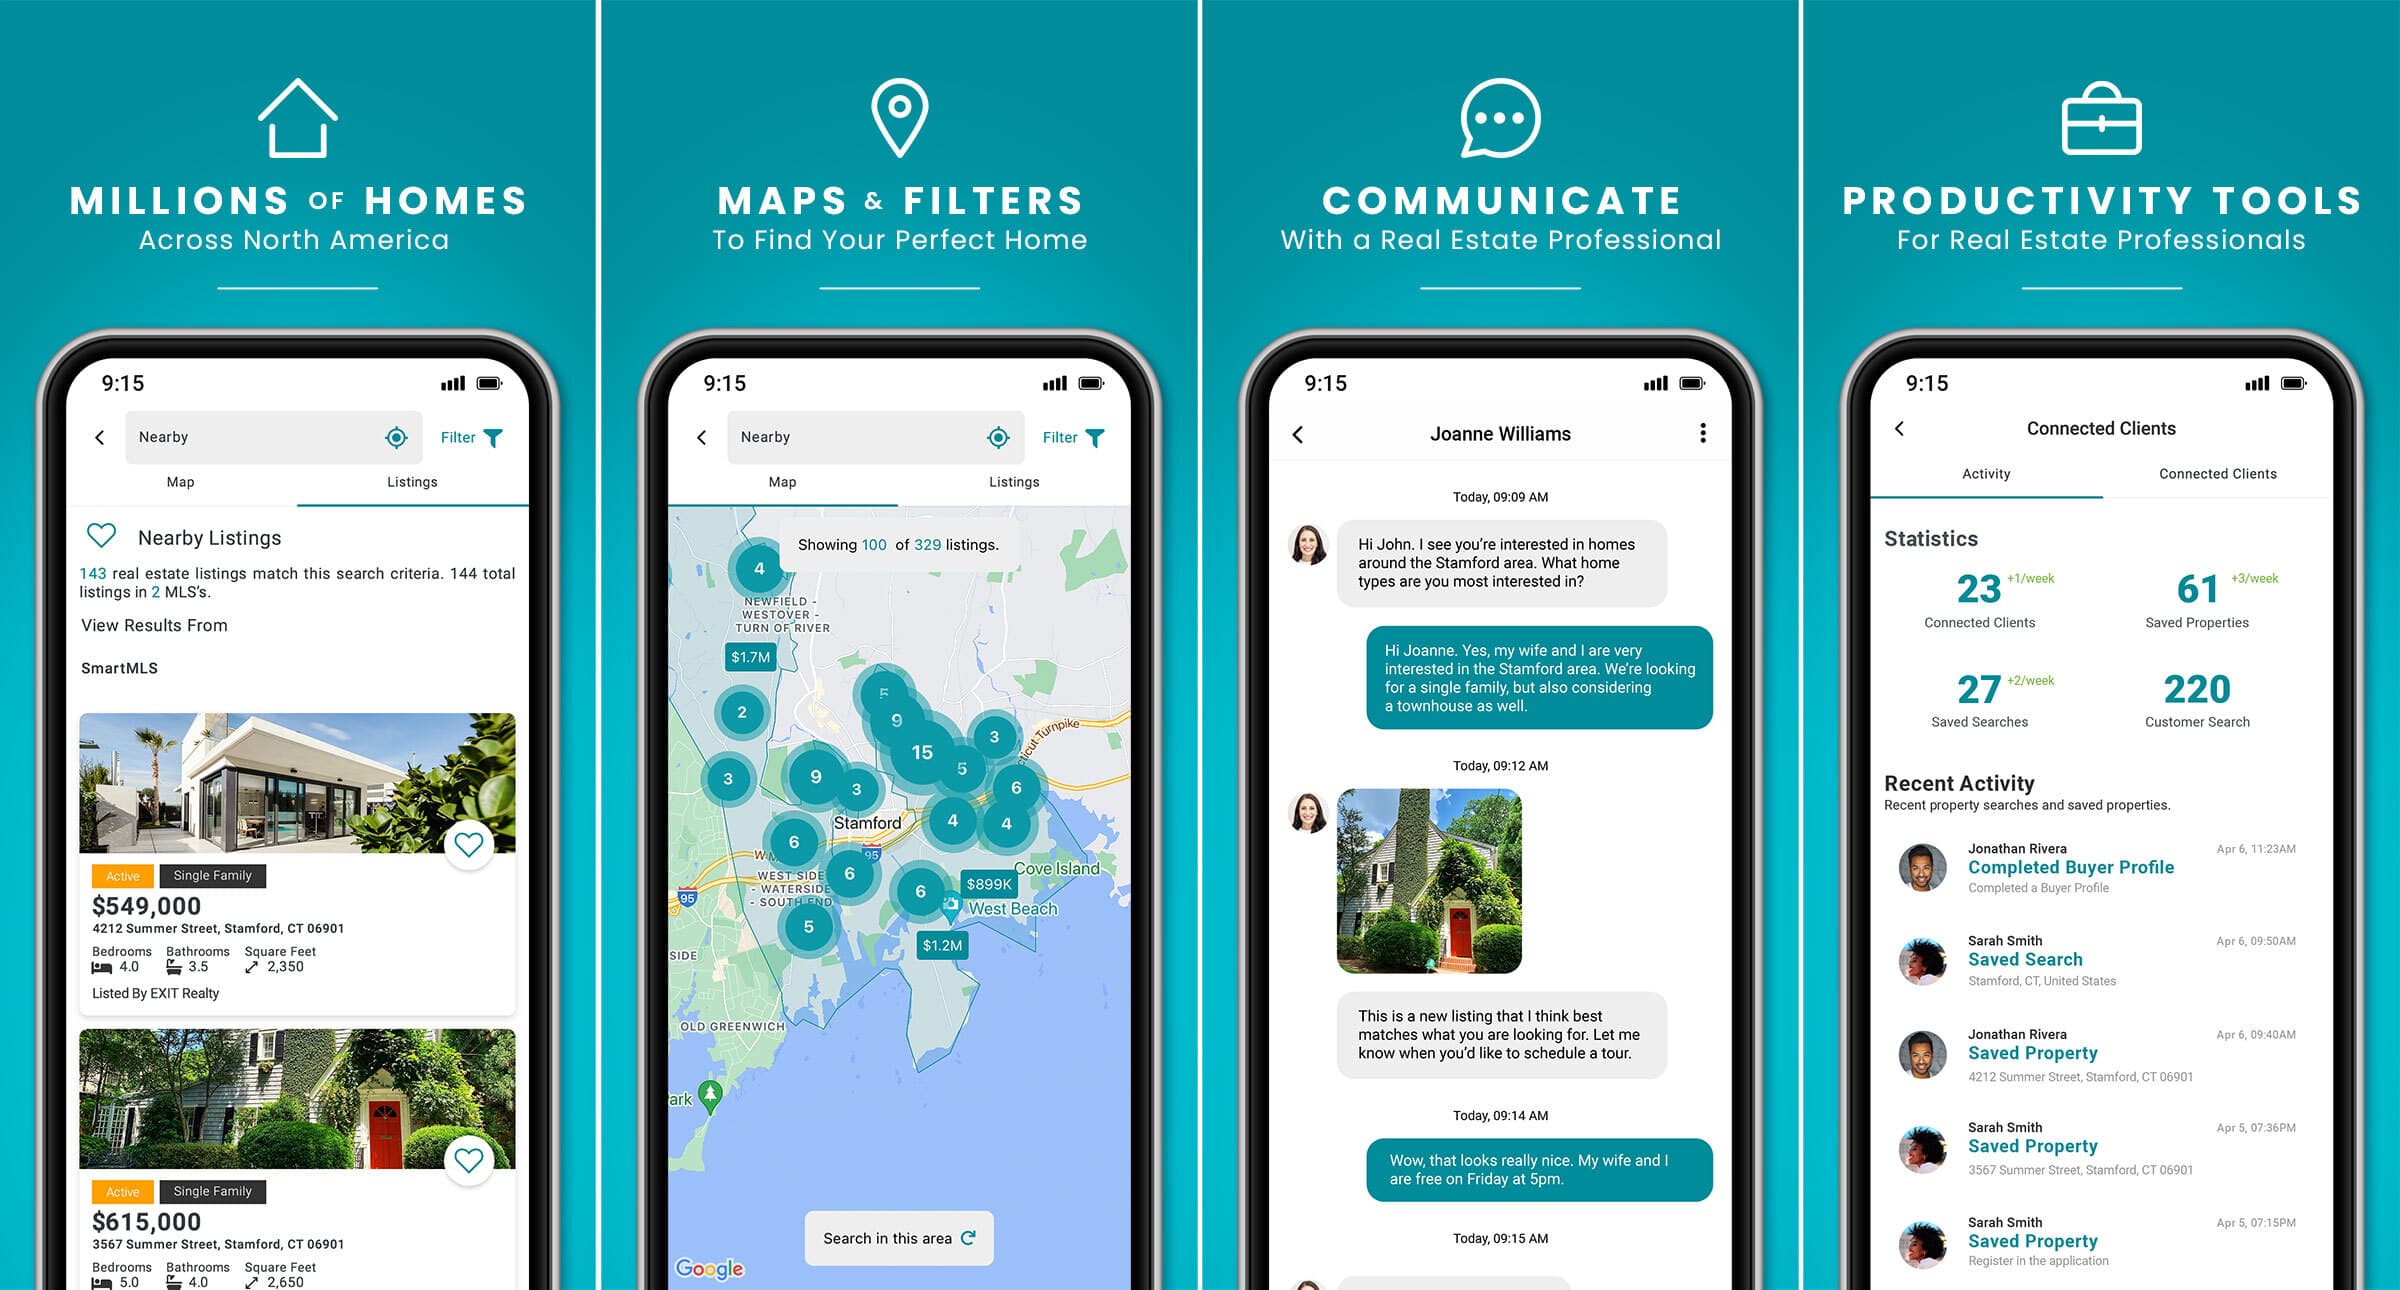 EXIT Realty's App connects you to millions of homes across north america with maps and filters to help you find the perfect home while communicating with your real estate professional!